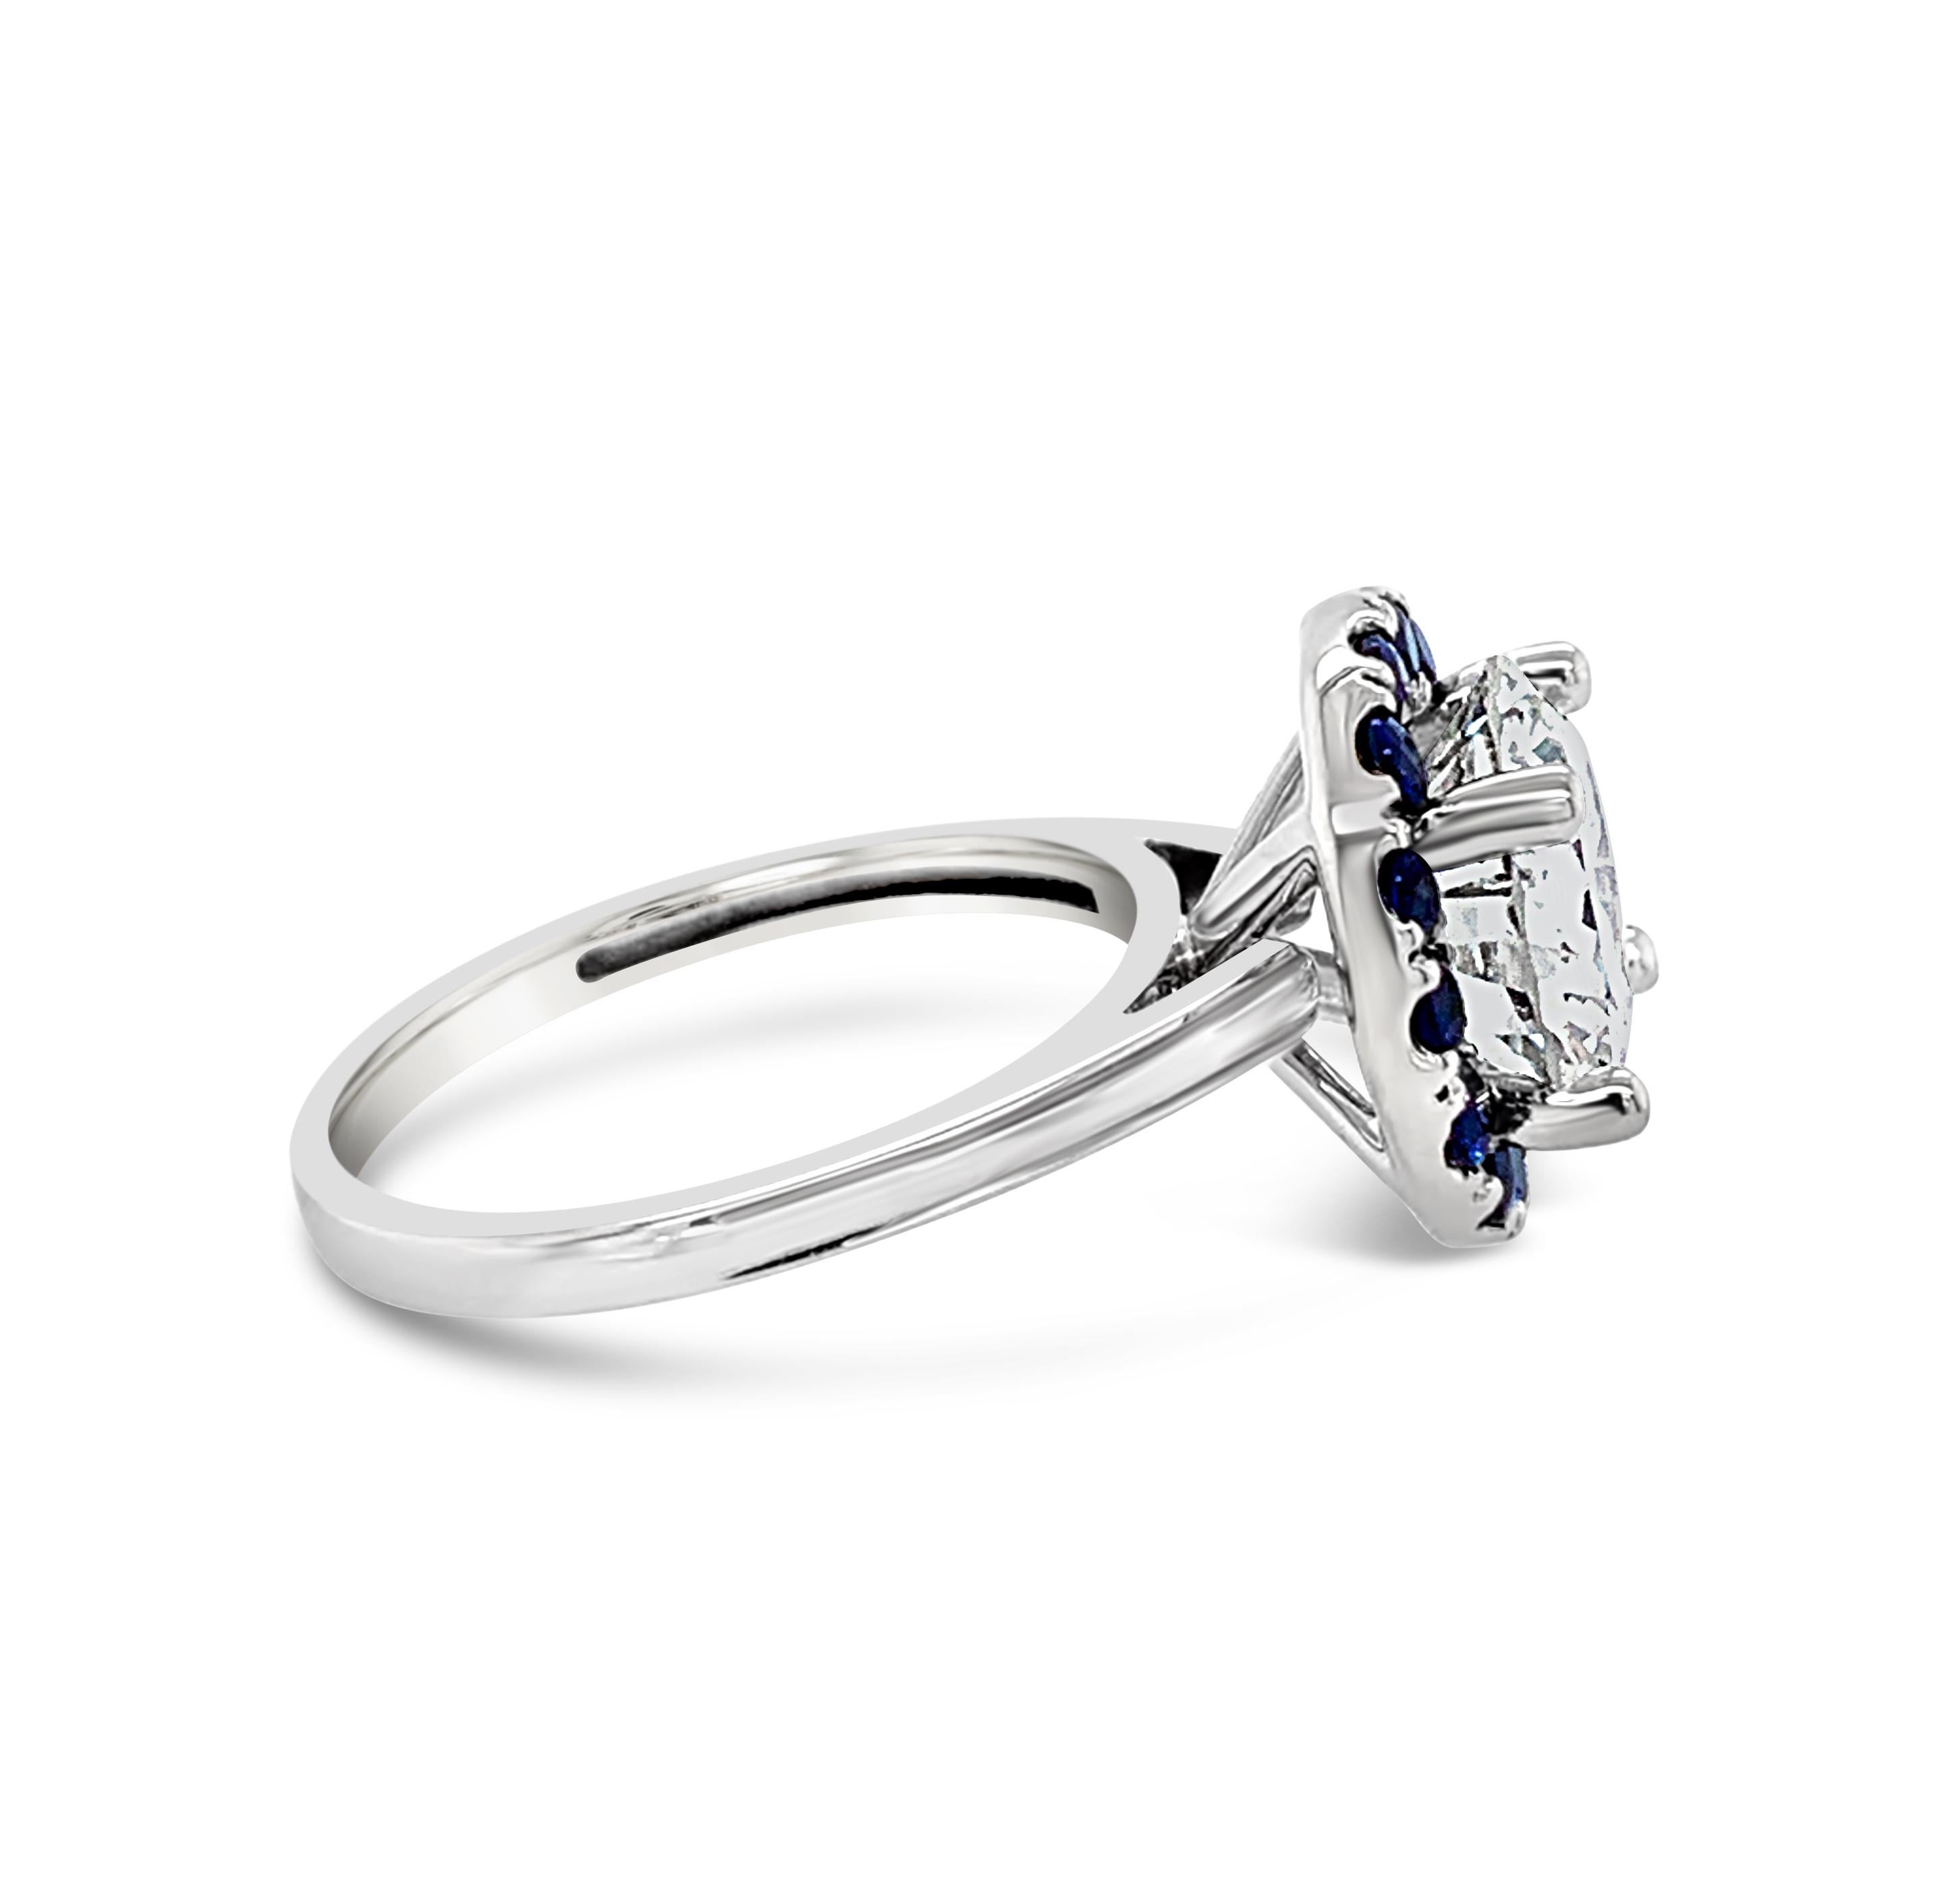 3.51 Carat Round Brilliant Diamond Sapphire Halo Ring in 14K White Gold.  Center round brilliant cut diamond color grade is H and clarity is VS-1.  Sapphire halo is 1.85 Carat (total weight).  
